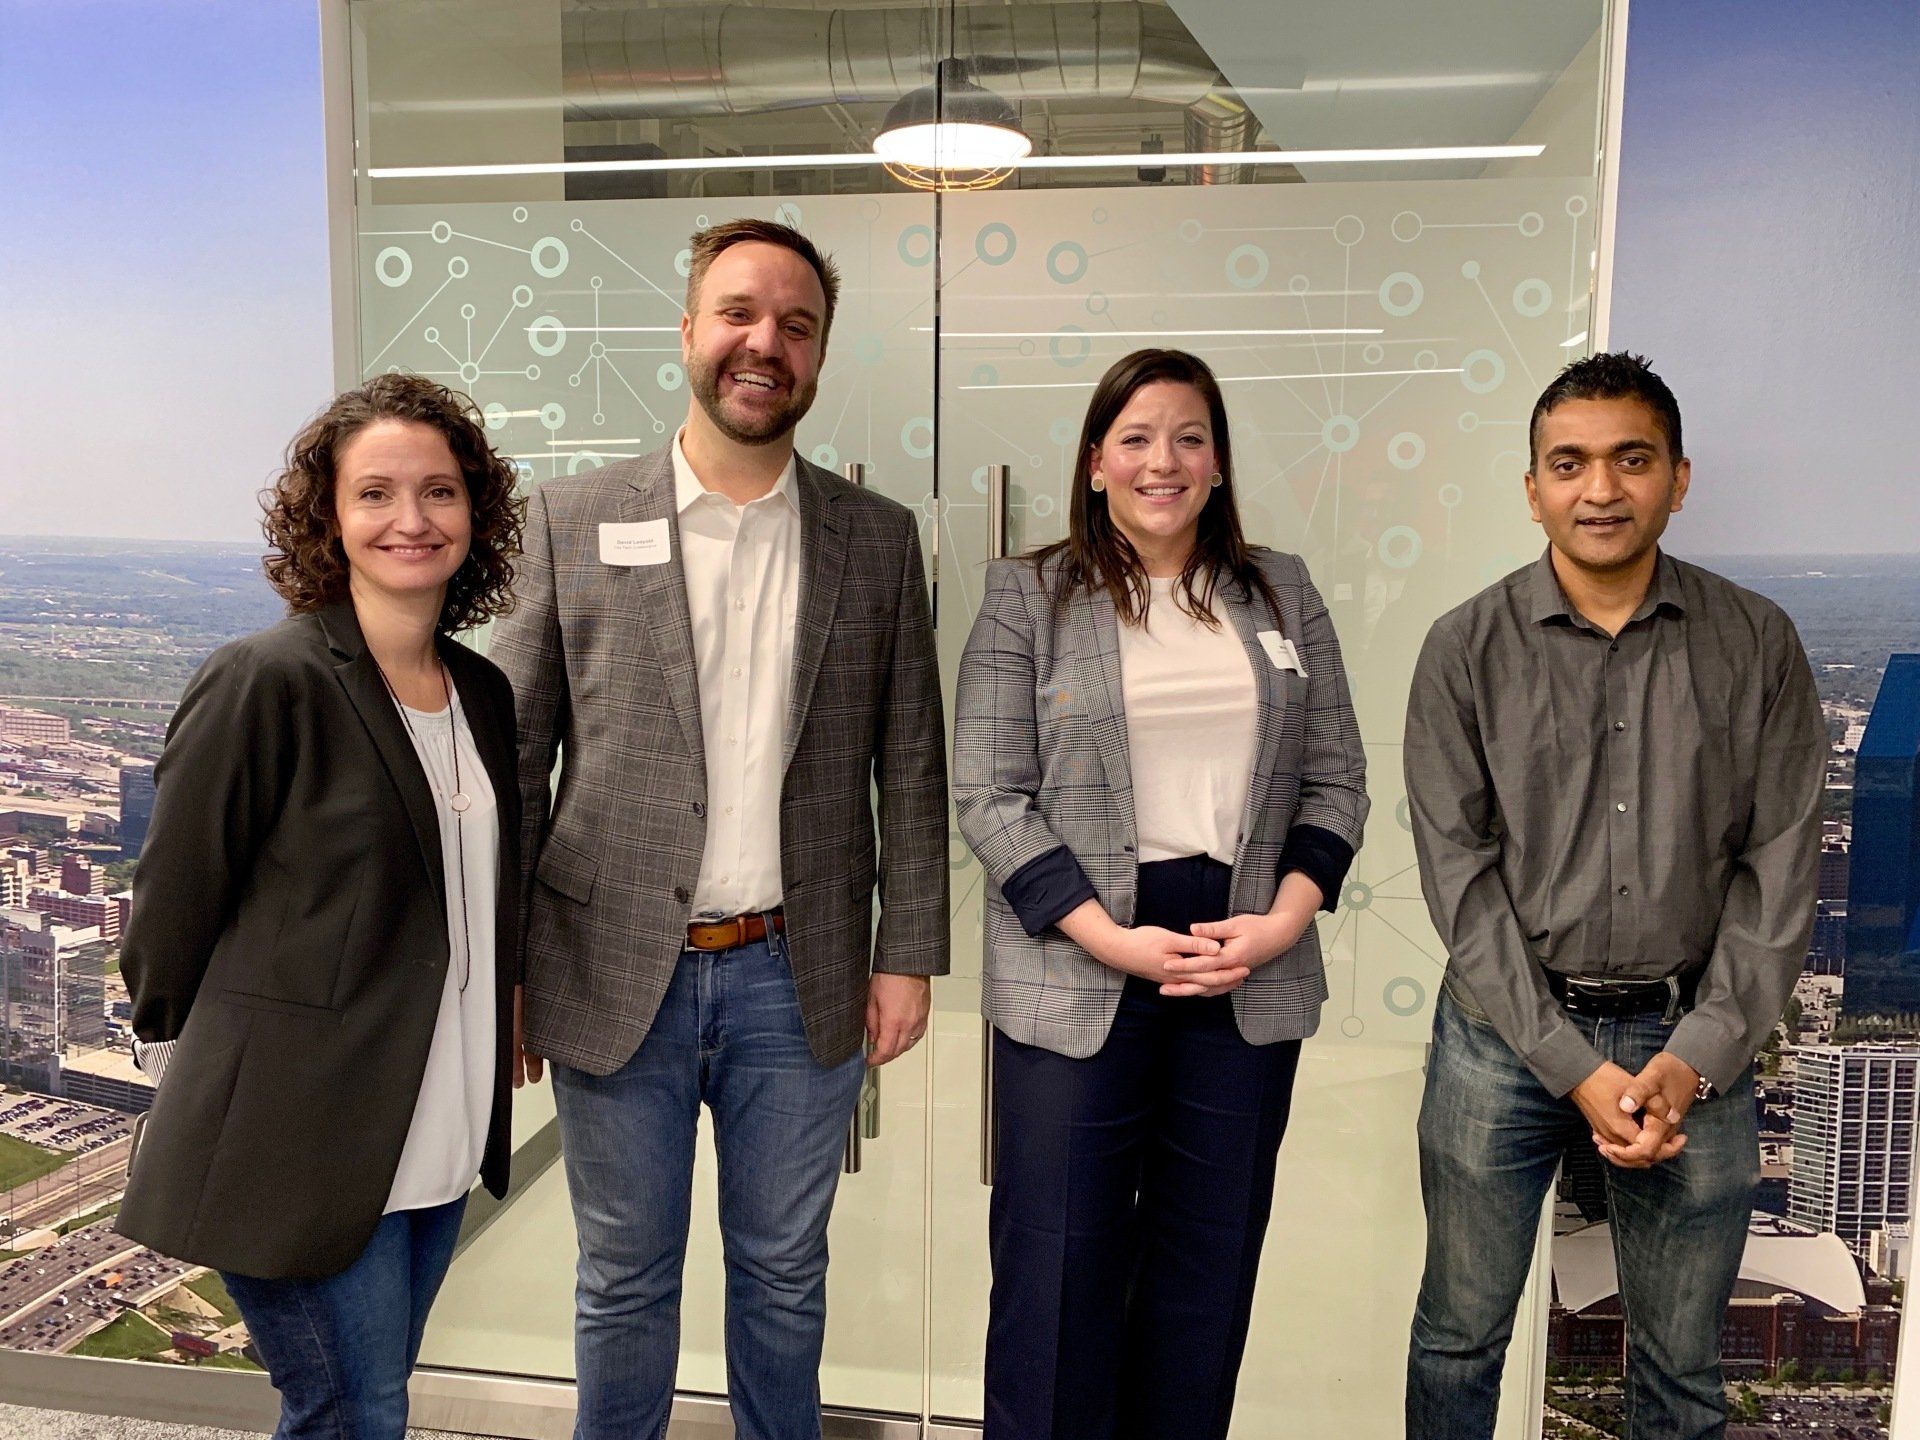 Brenna Berman and David Leopold from City Tech joined Molly Poppe of Chicago Transit Authority (CTA) and Rikesh Shah of Transport for London in a panel discussion about innovation in transit agencies.